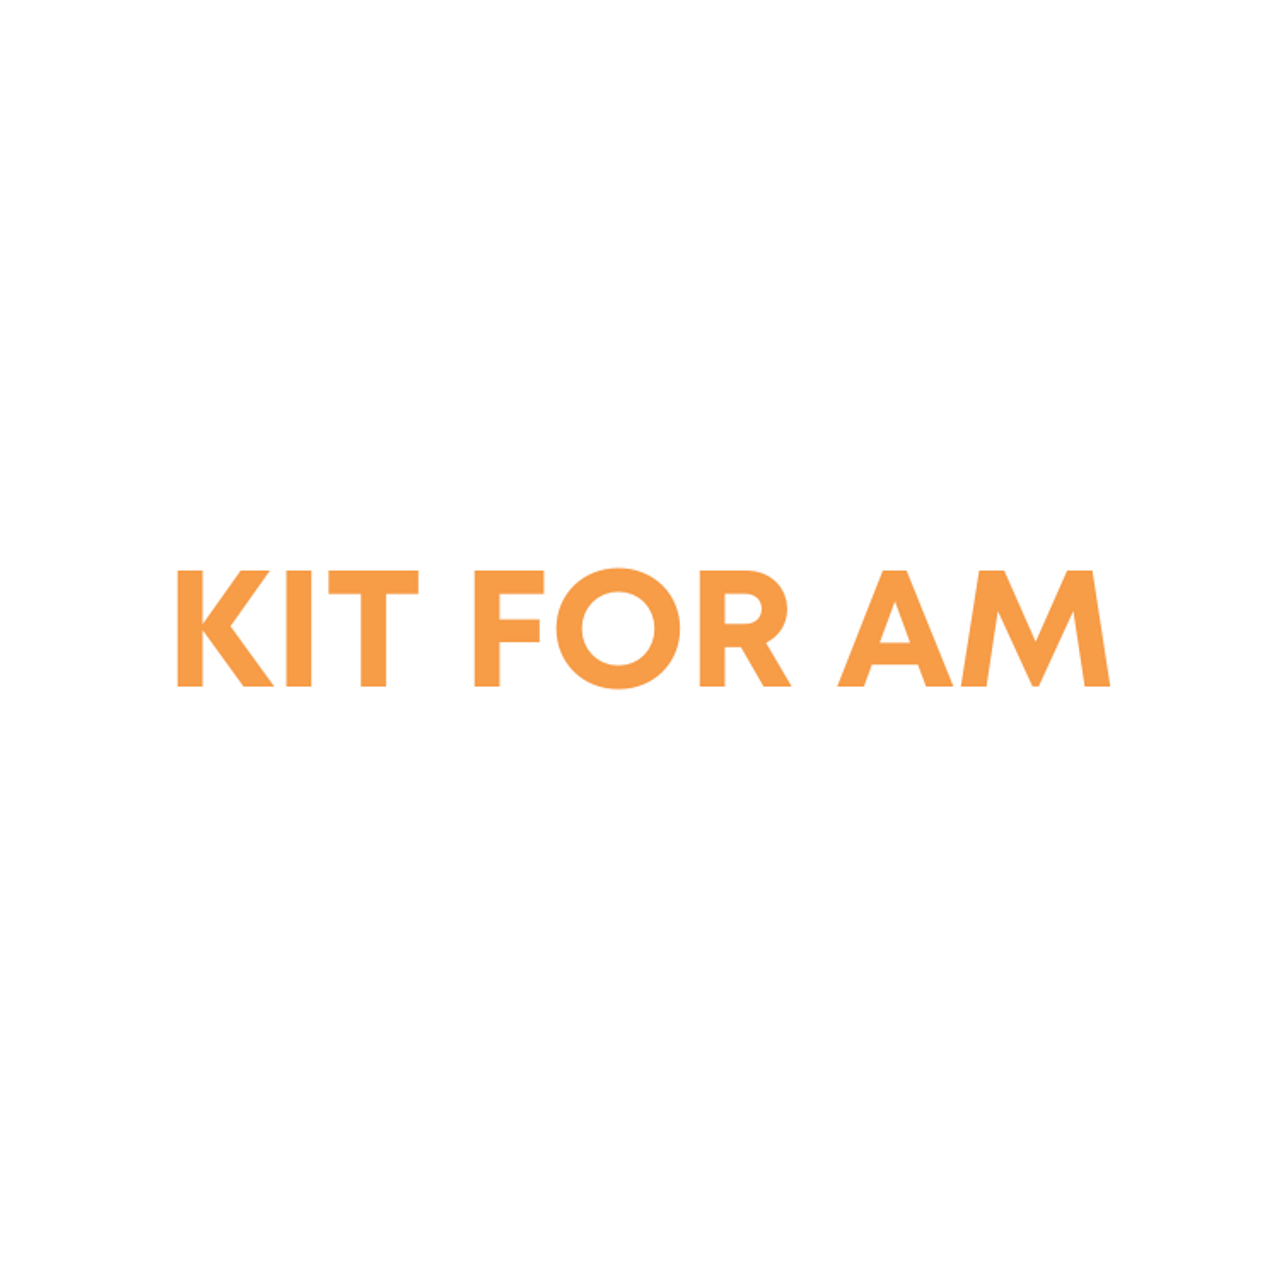 Kit for AM